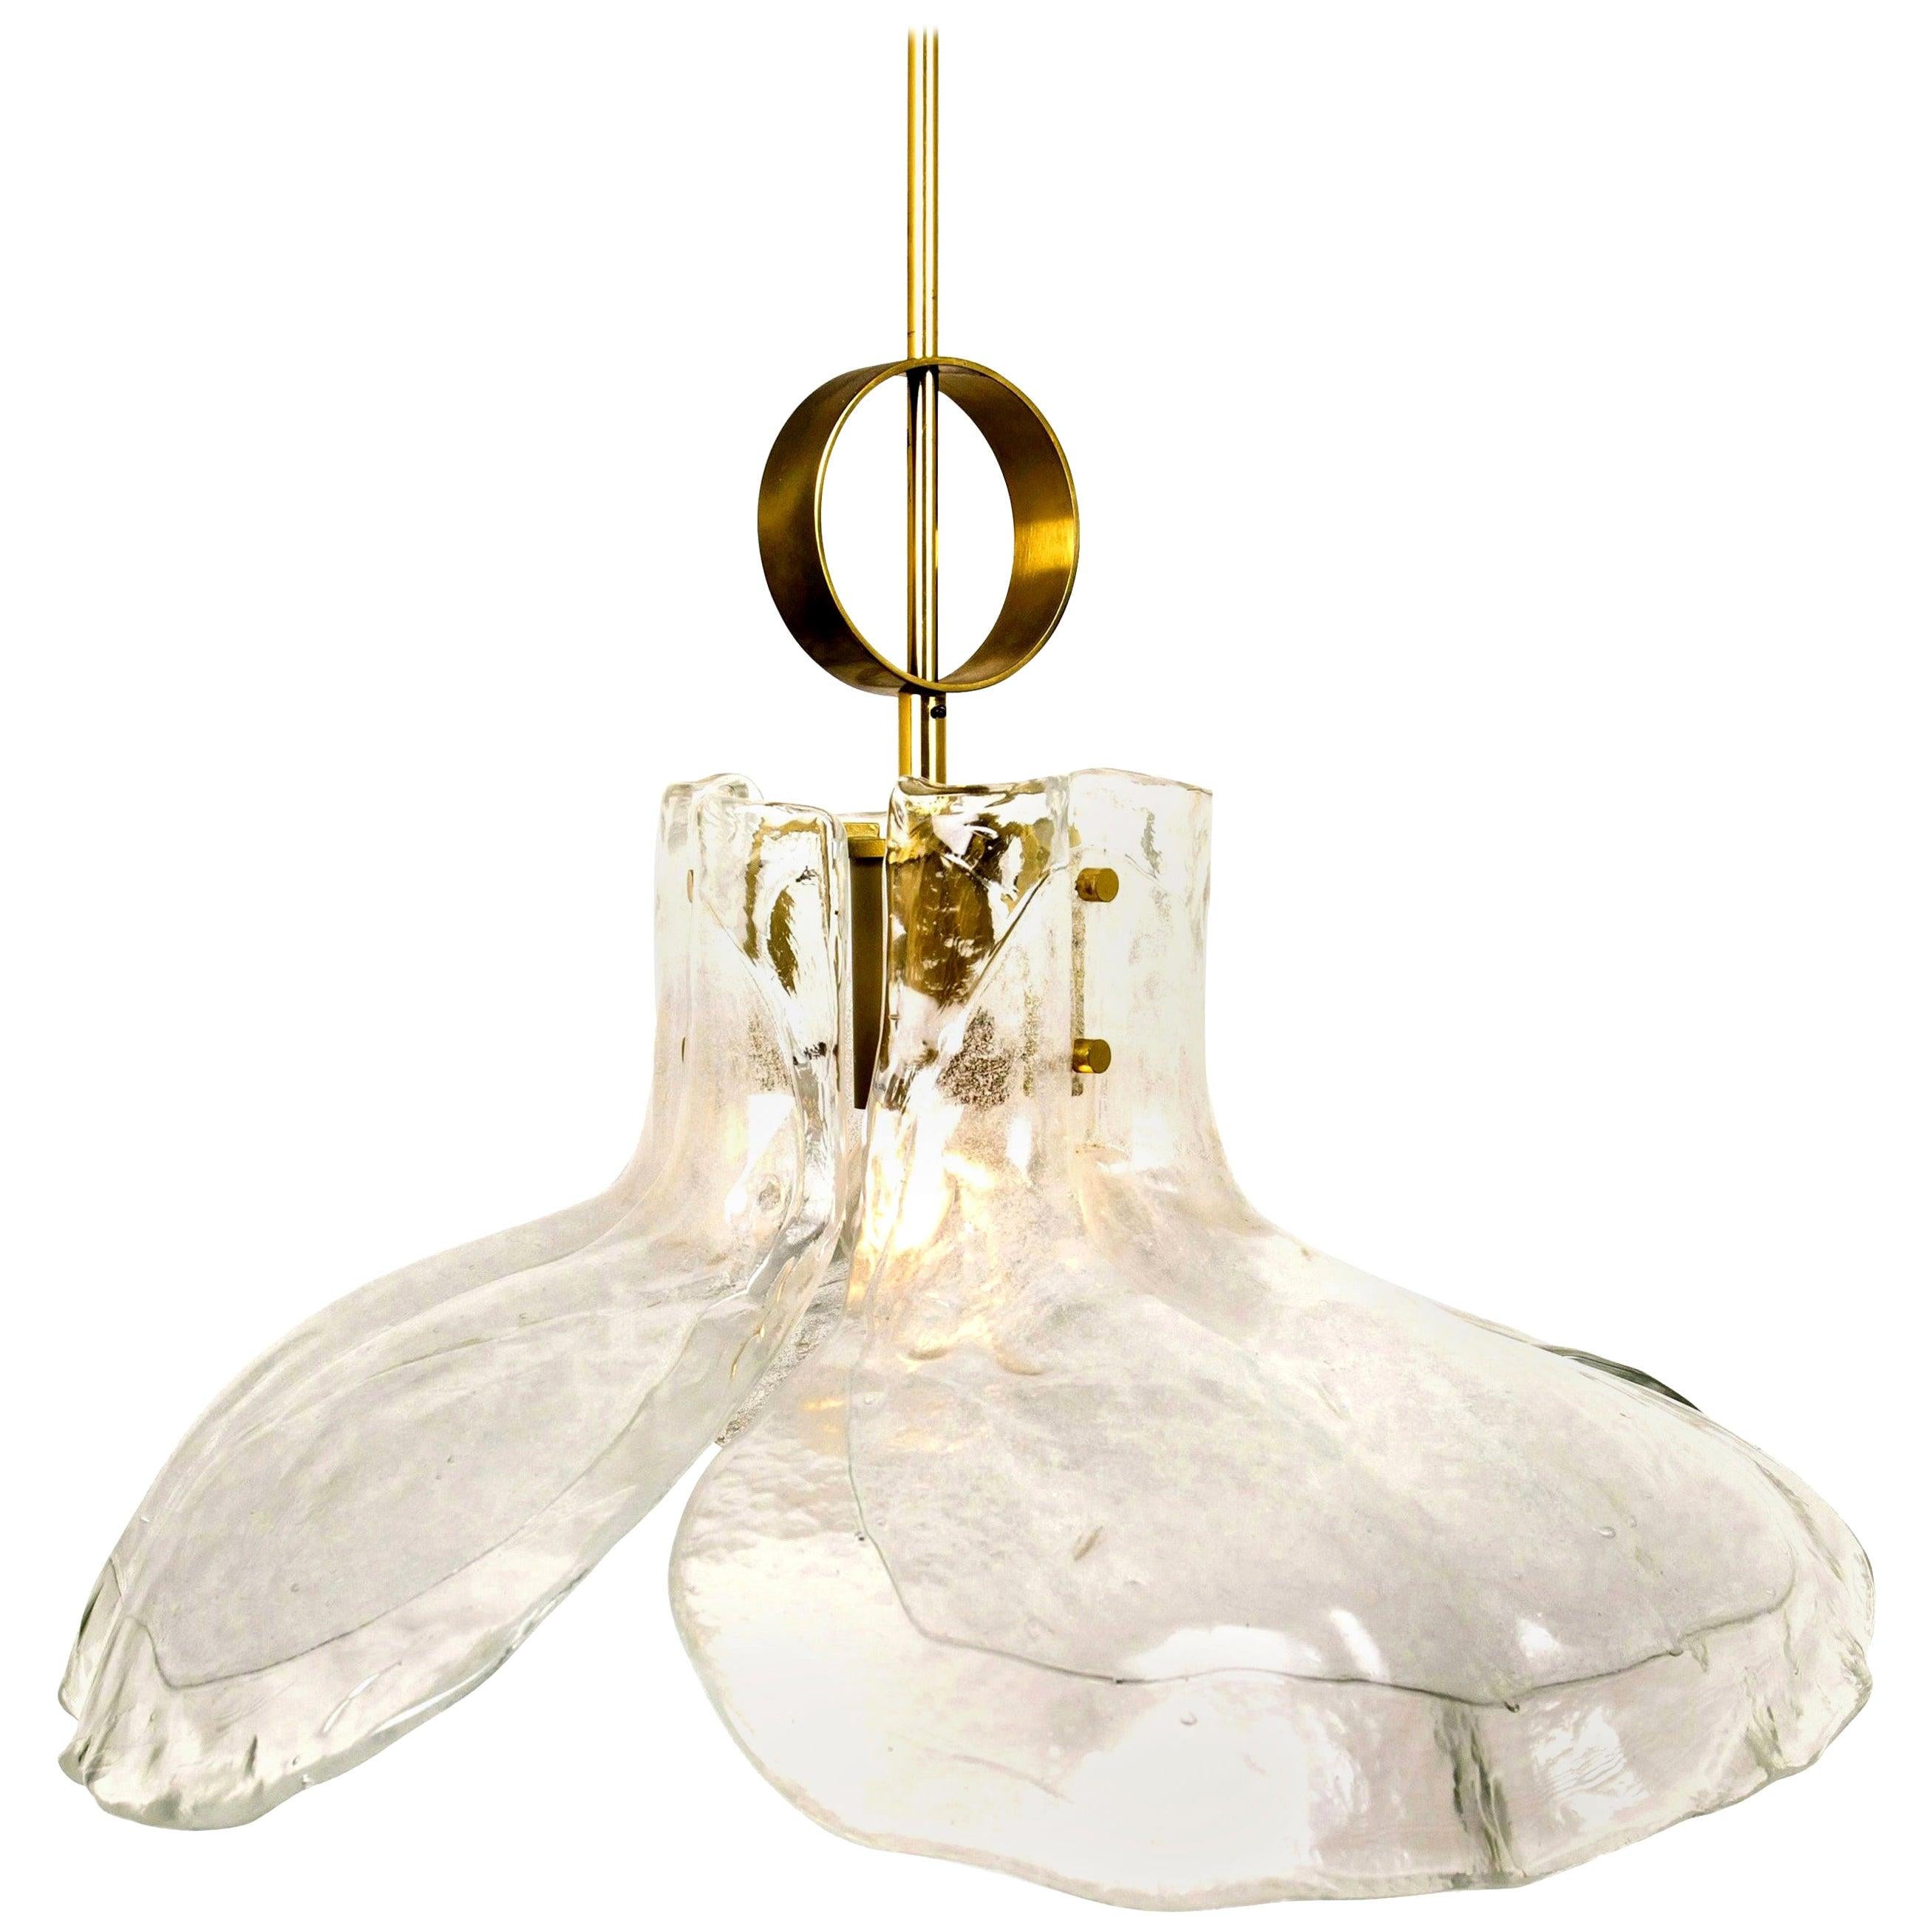 A beautiful mid century brass chandelier with four melting glass panels in the shape of a flower.

Designed and executed by Kalmar Vienna in the 1970s. Hand blown melting glass, made of clear glass. Has a very nice ornamental ring on its brass rod.